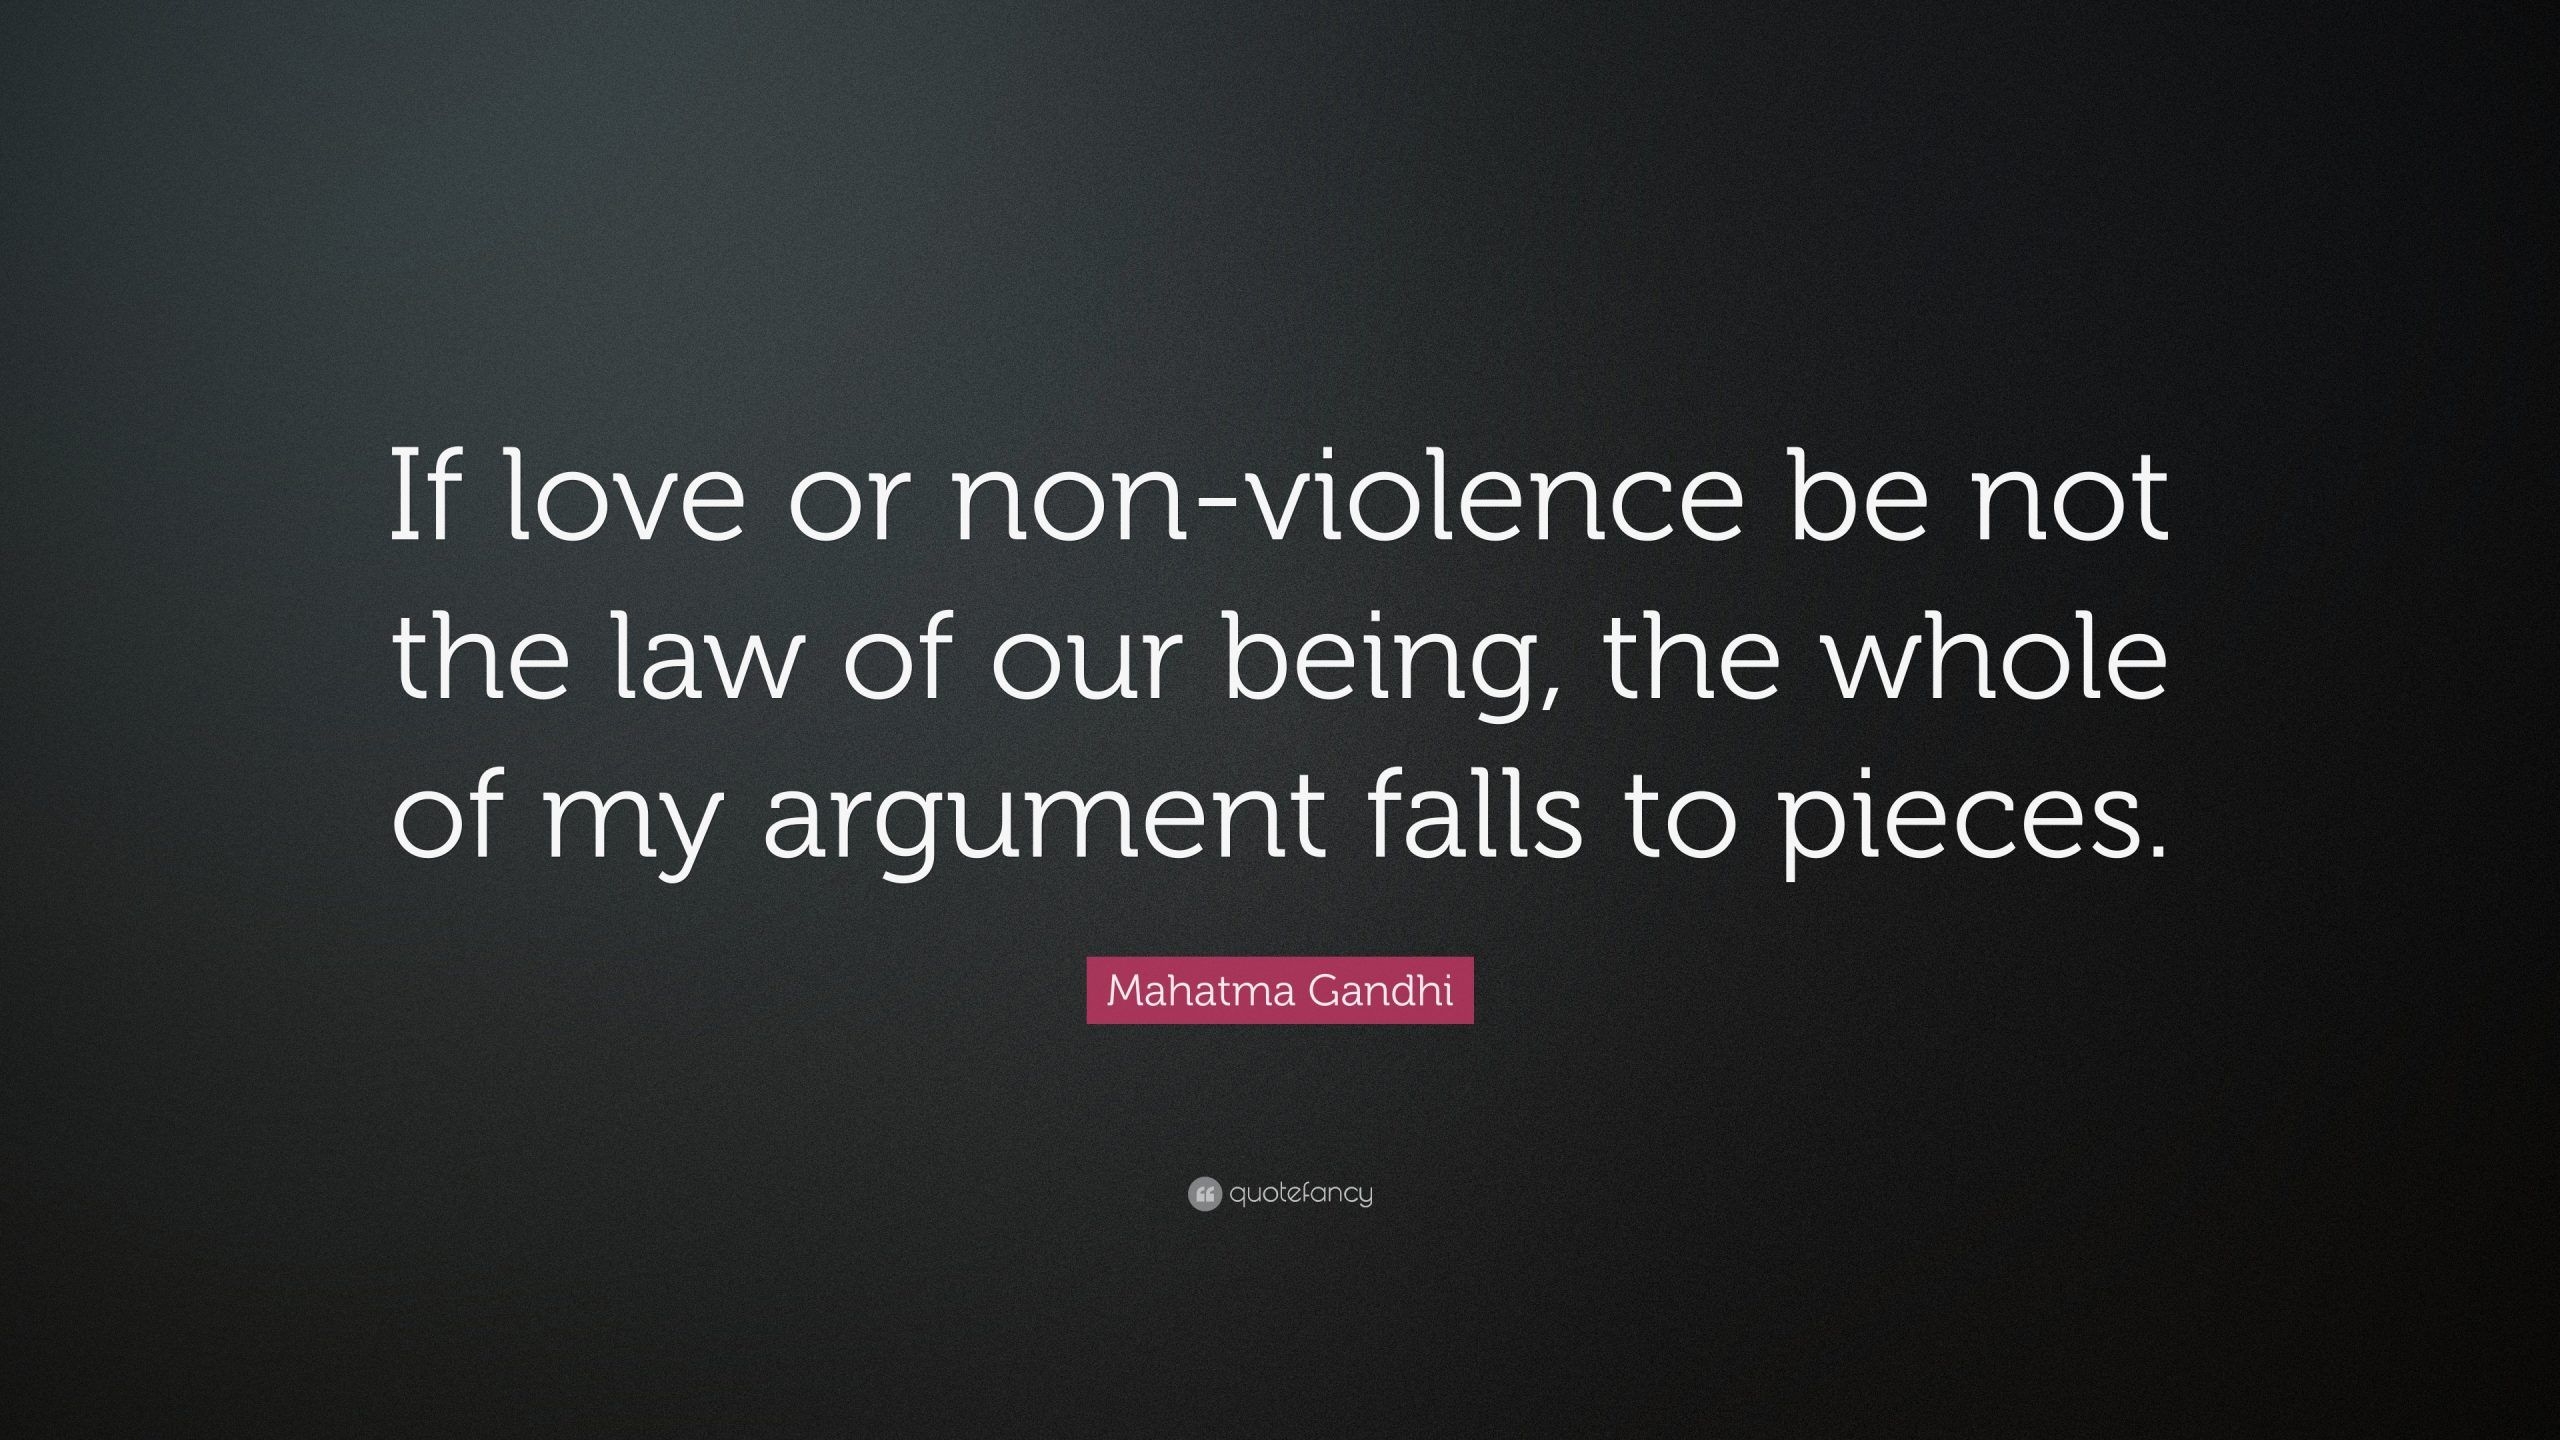 Quotes Fabulous Gandhi Non Violence Quote Quotes Mahatma E2809cnonviolence Is Weapon Of The Strong Wallpaper Fabulous Gandhi Non Violence Quote